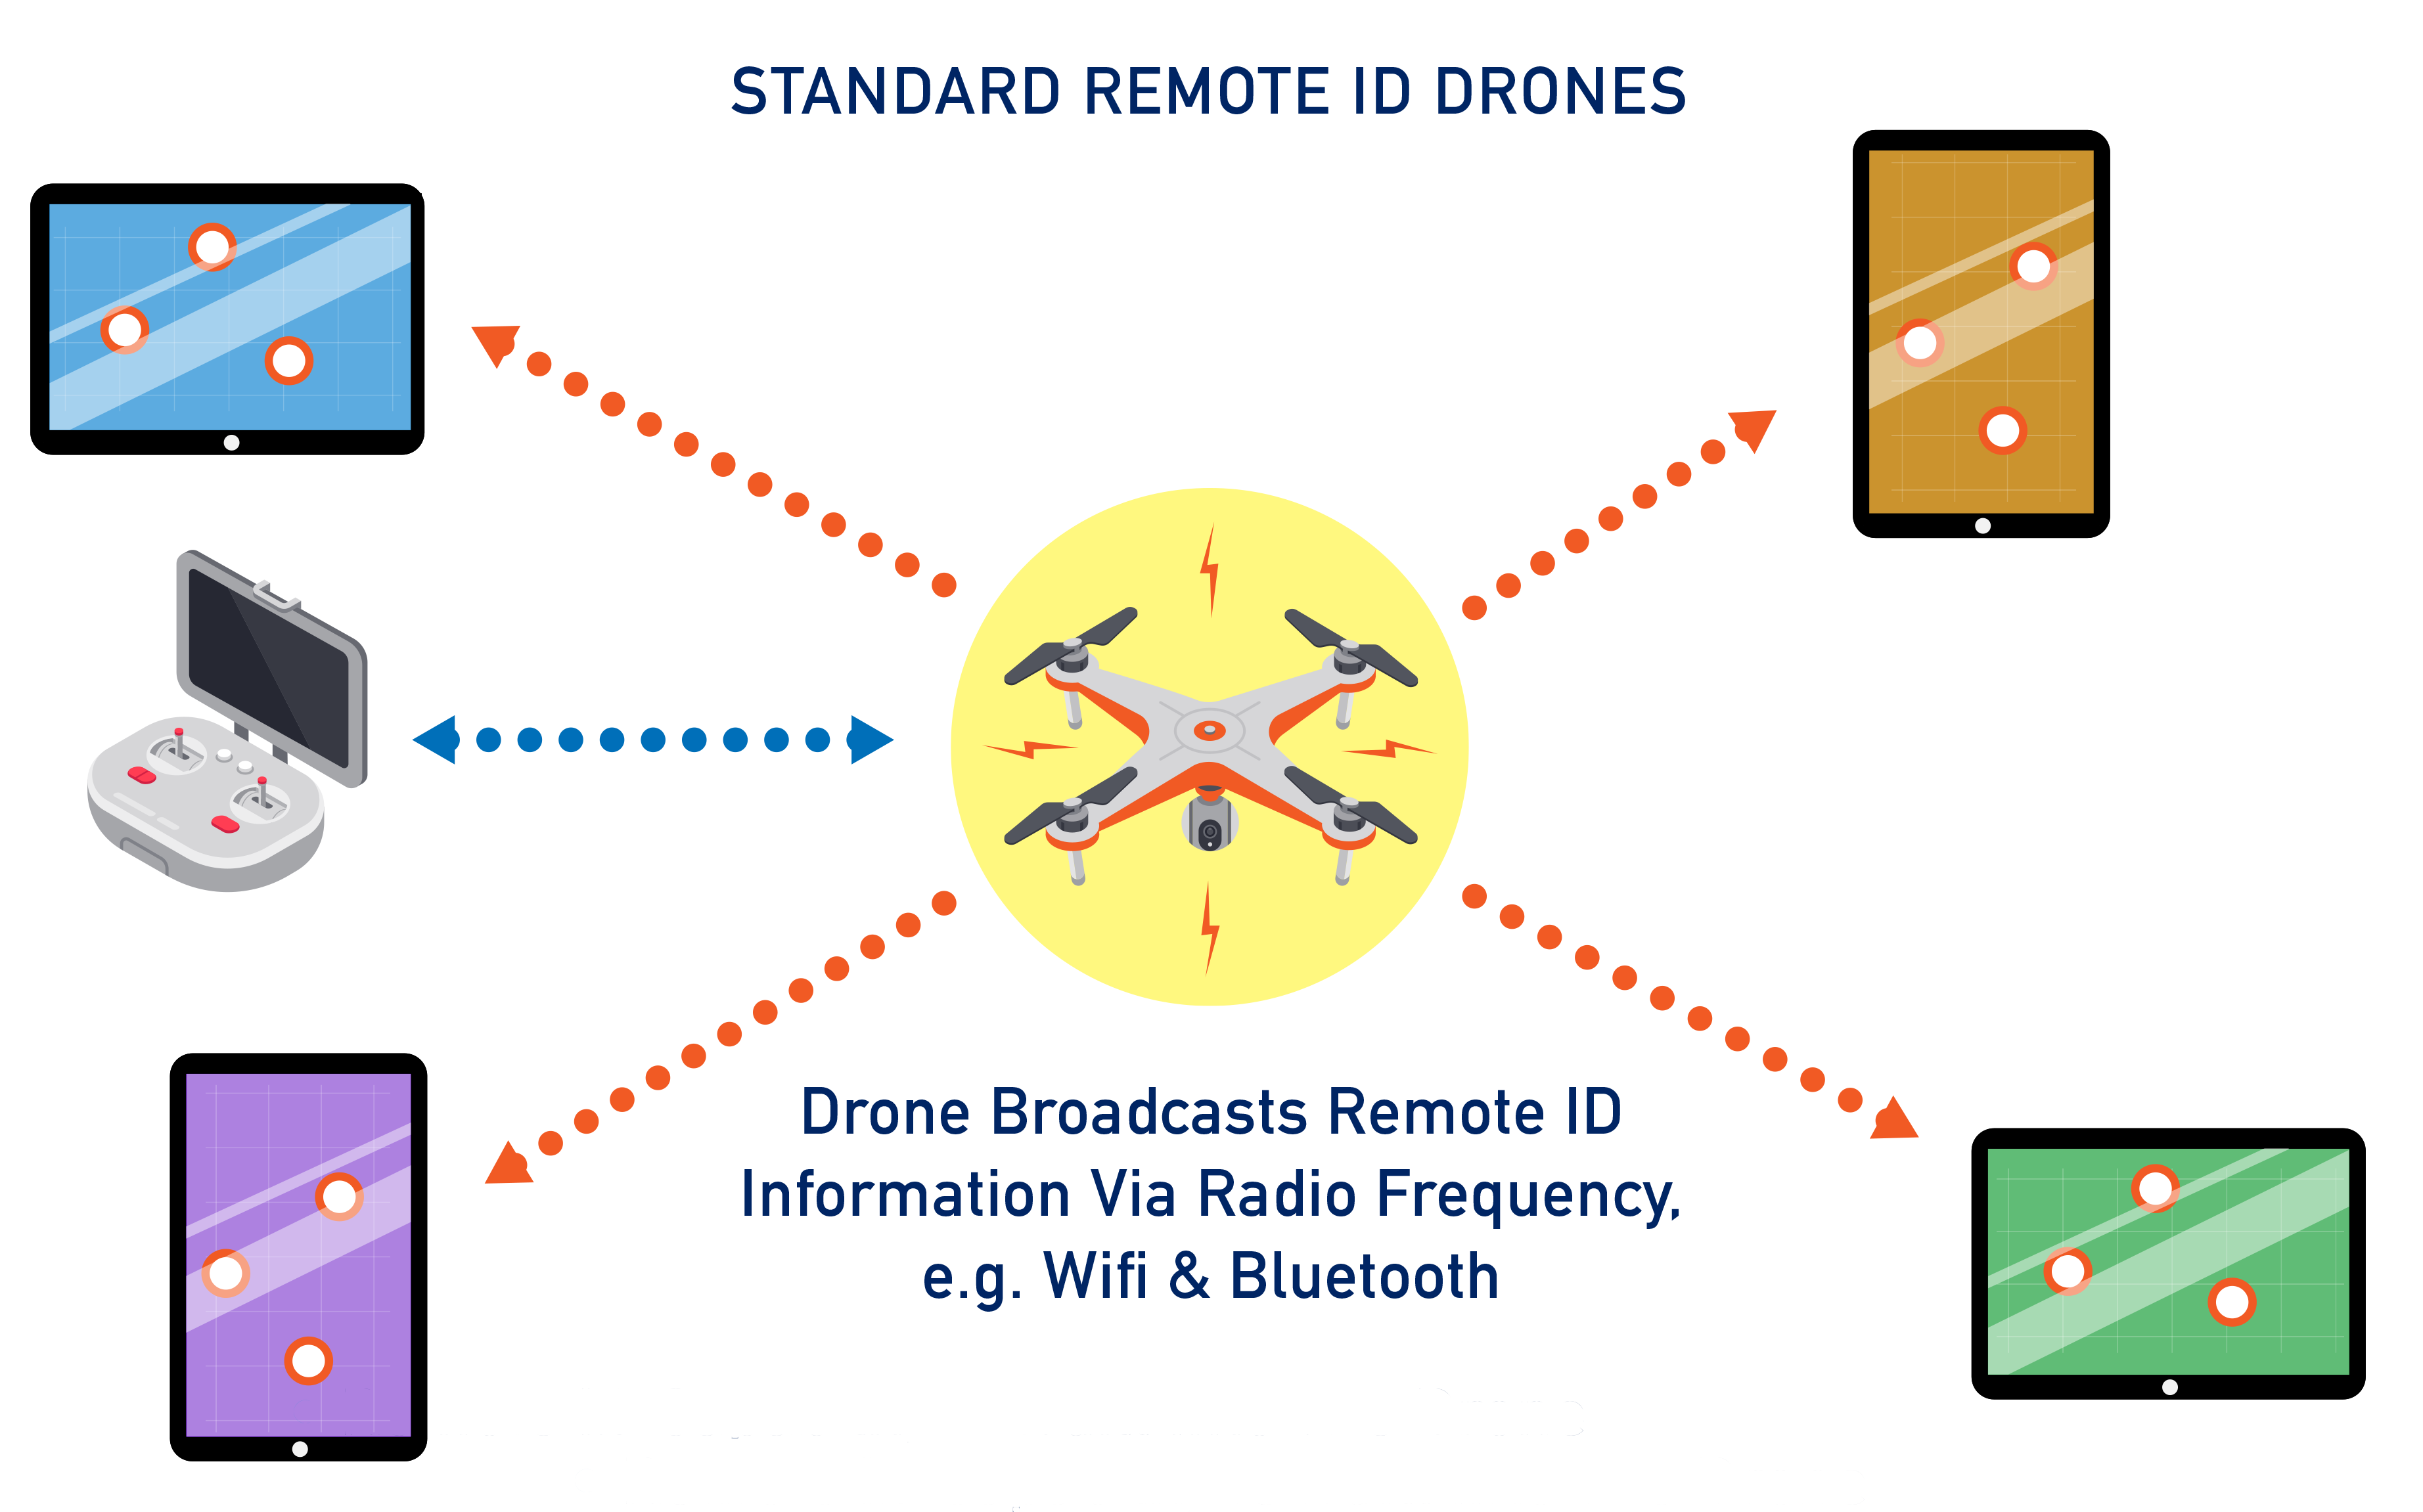 Standard Remote ID for Drones